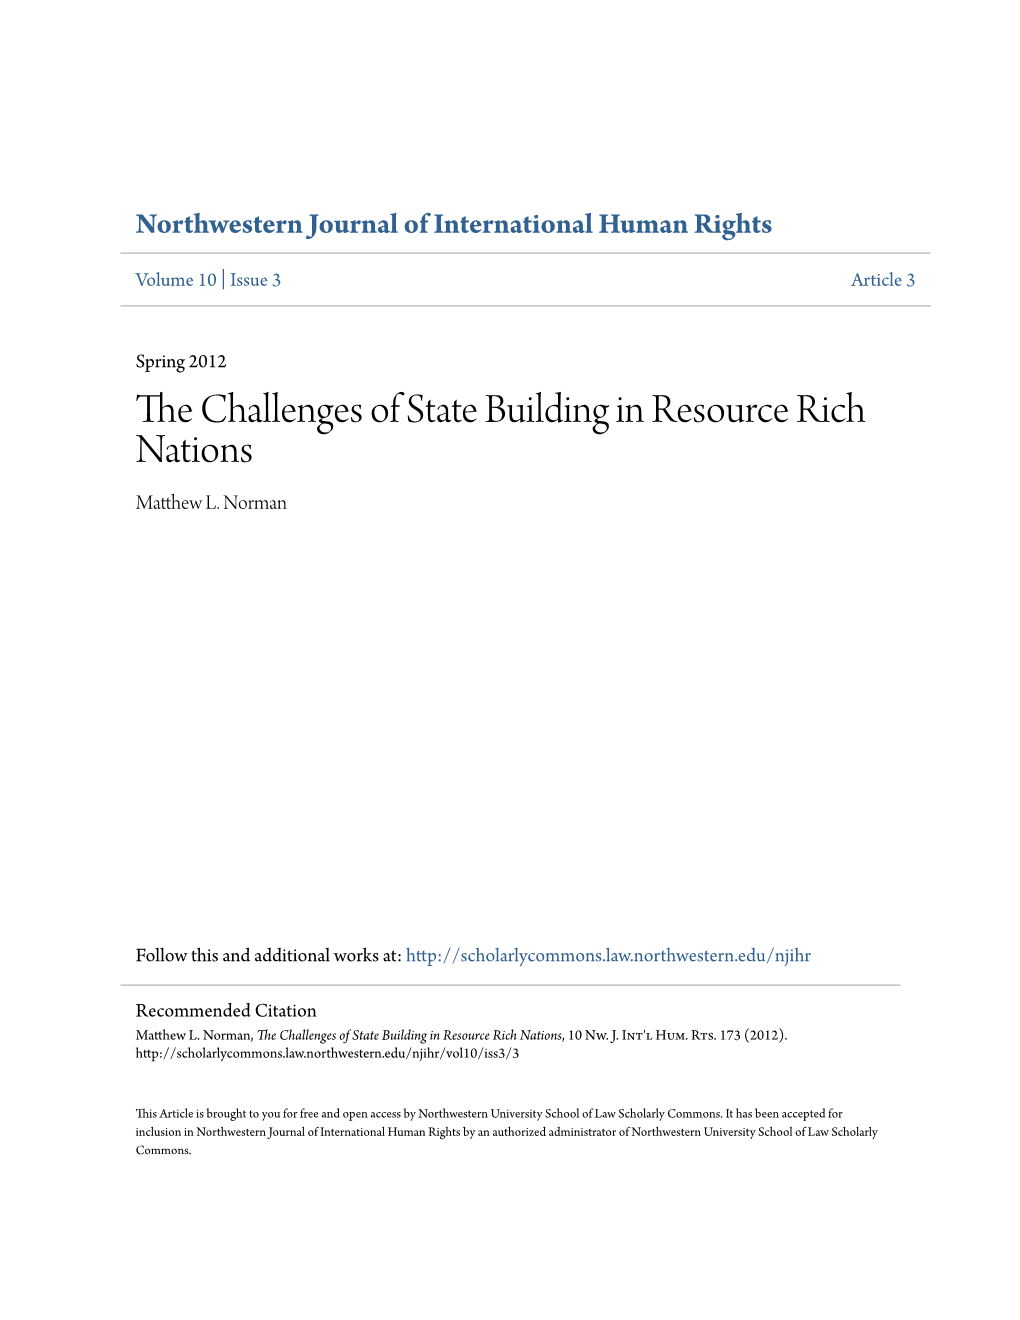 The Challenges of State Building in Resource Rich Nations, 10 Nw